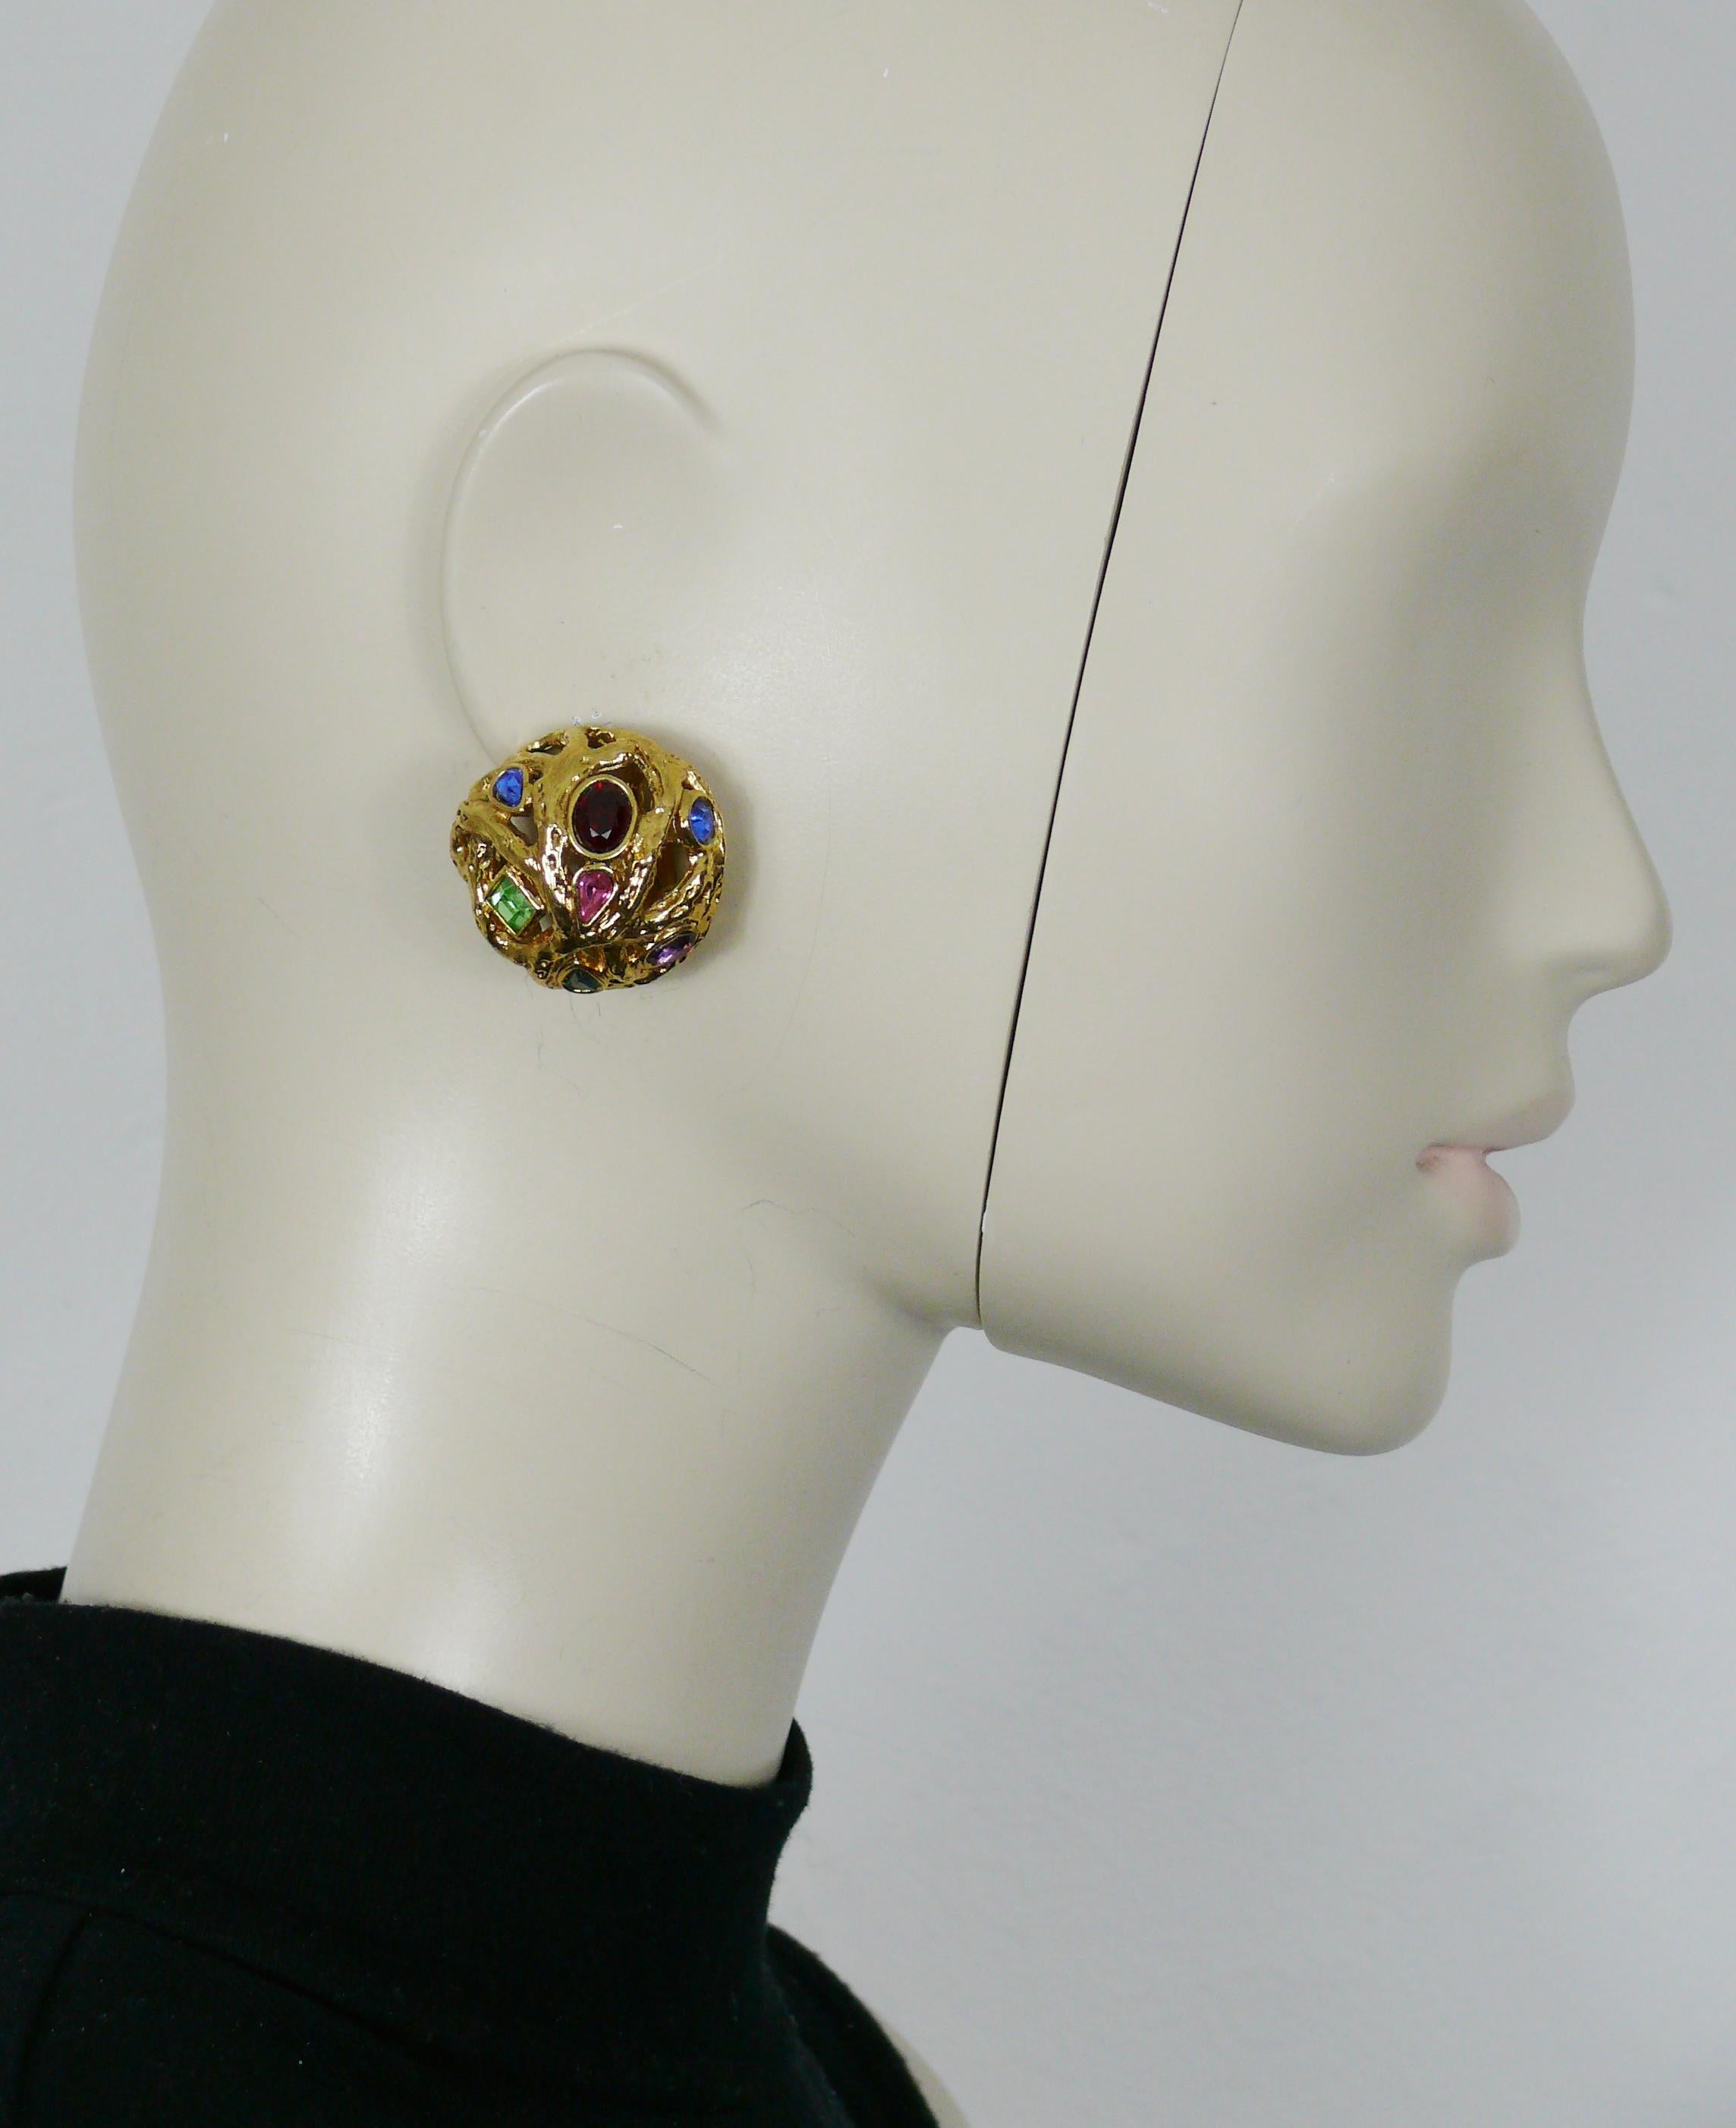 YVES SAINT LAURENT vintage gold tone domed clip-on earrings featuring a gorgeous openwork design of intertwined branches embellished with multicolored crystals.

Embossed YSL Made in France.

Indicative measurements : diameter approx. 3 cm (1.18